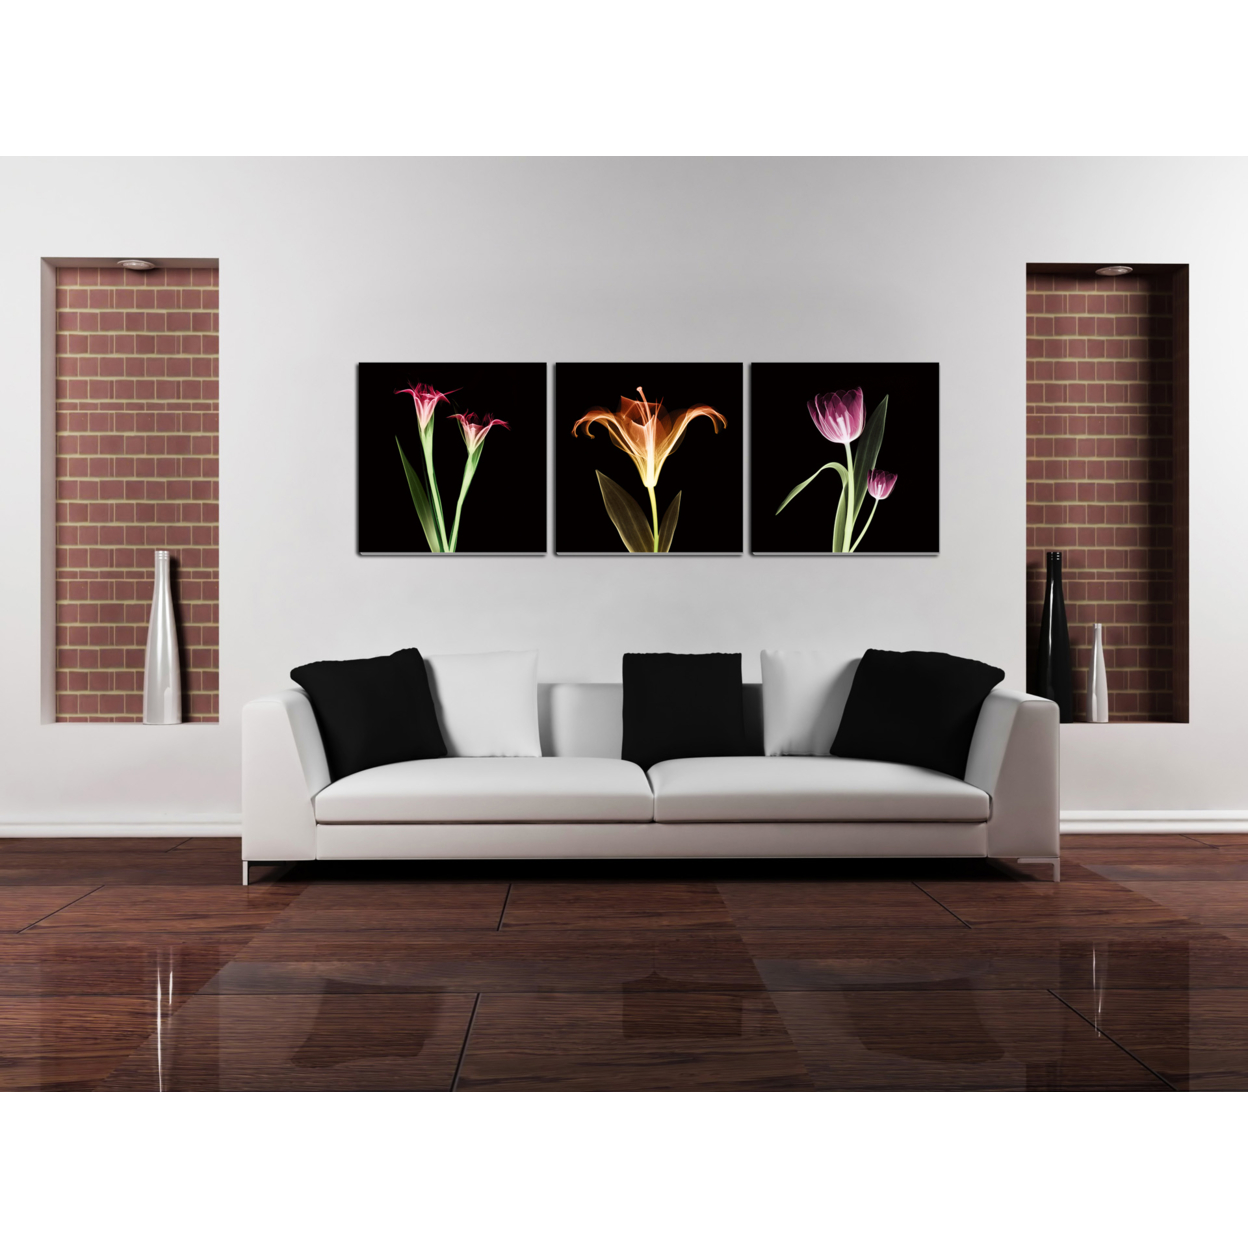 Tropical 3 Piece Wrapped Canvas Wall Art Print 27.5x82 Inches